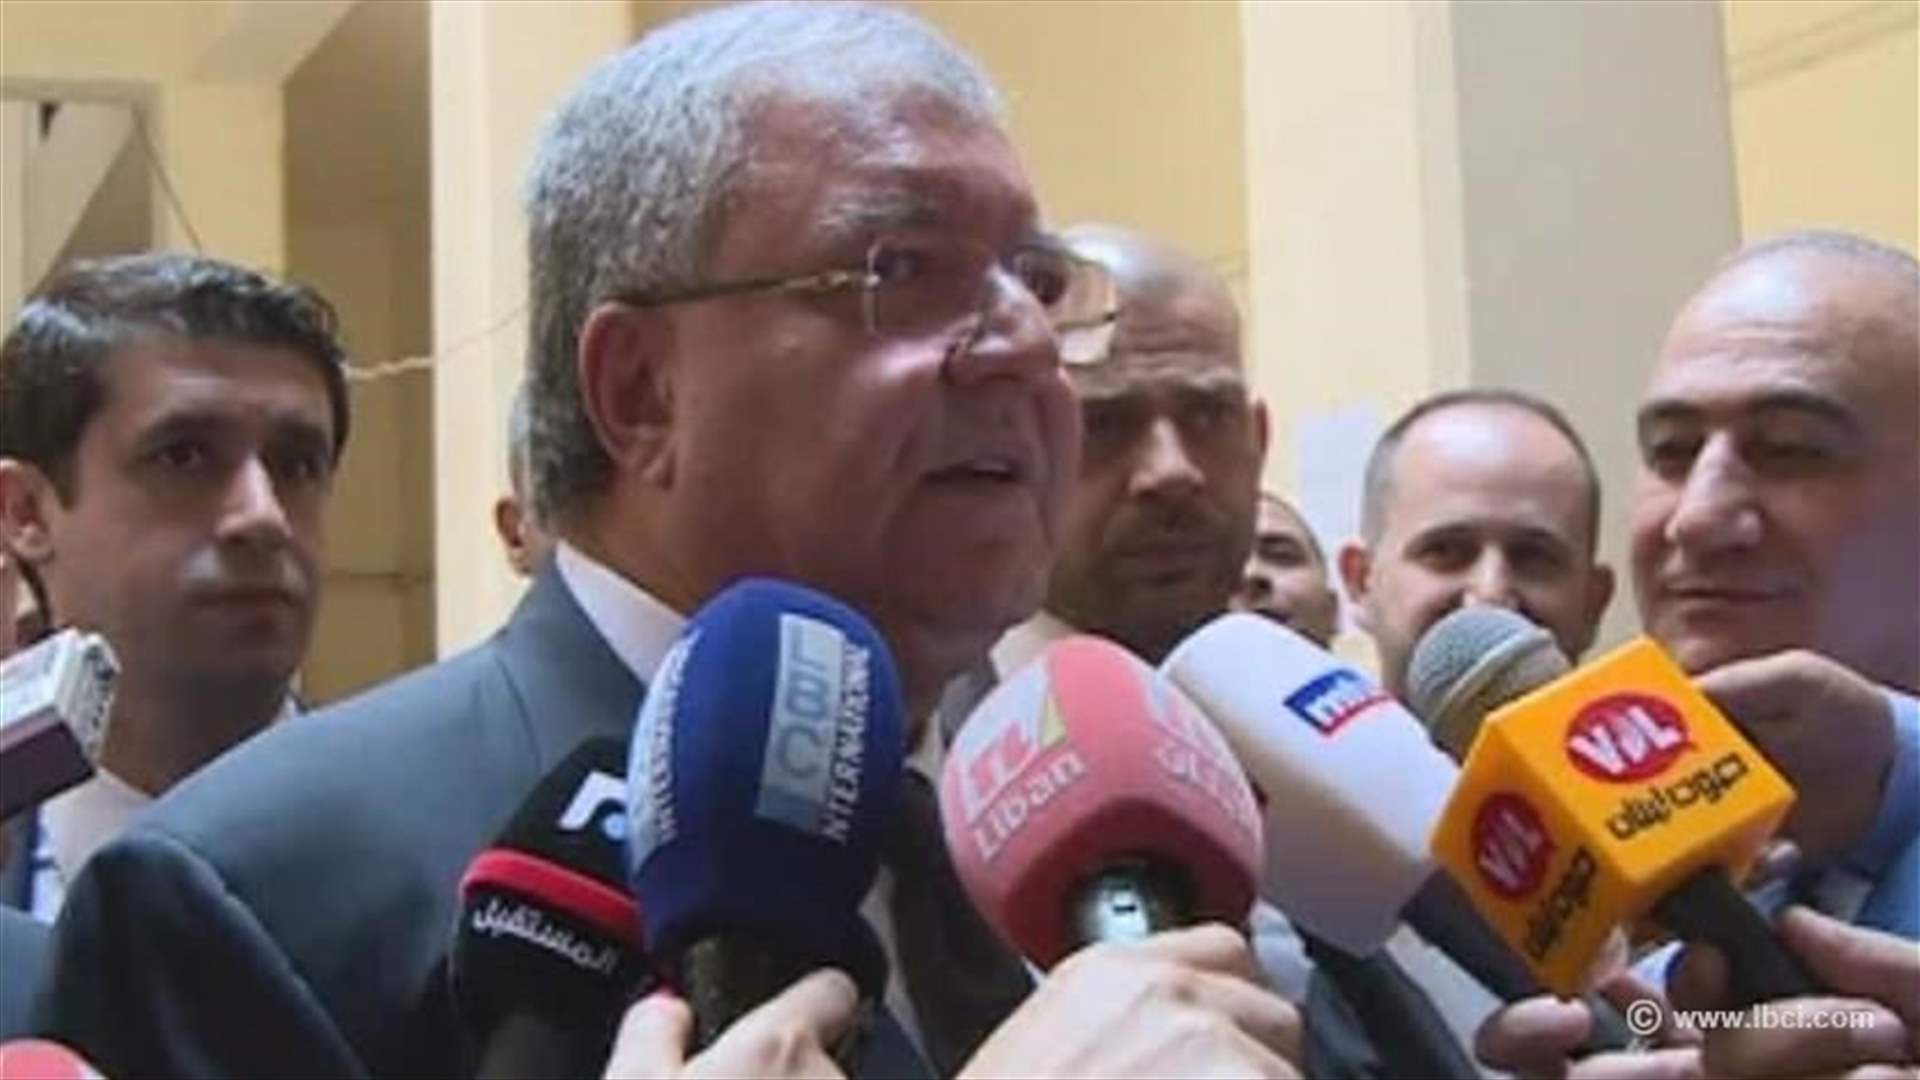 Interior minister says one person arrested over vote-buying in Zahle